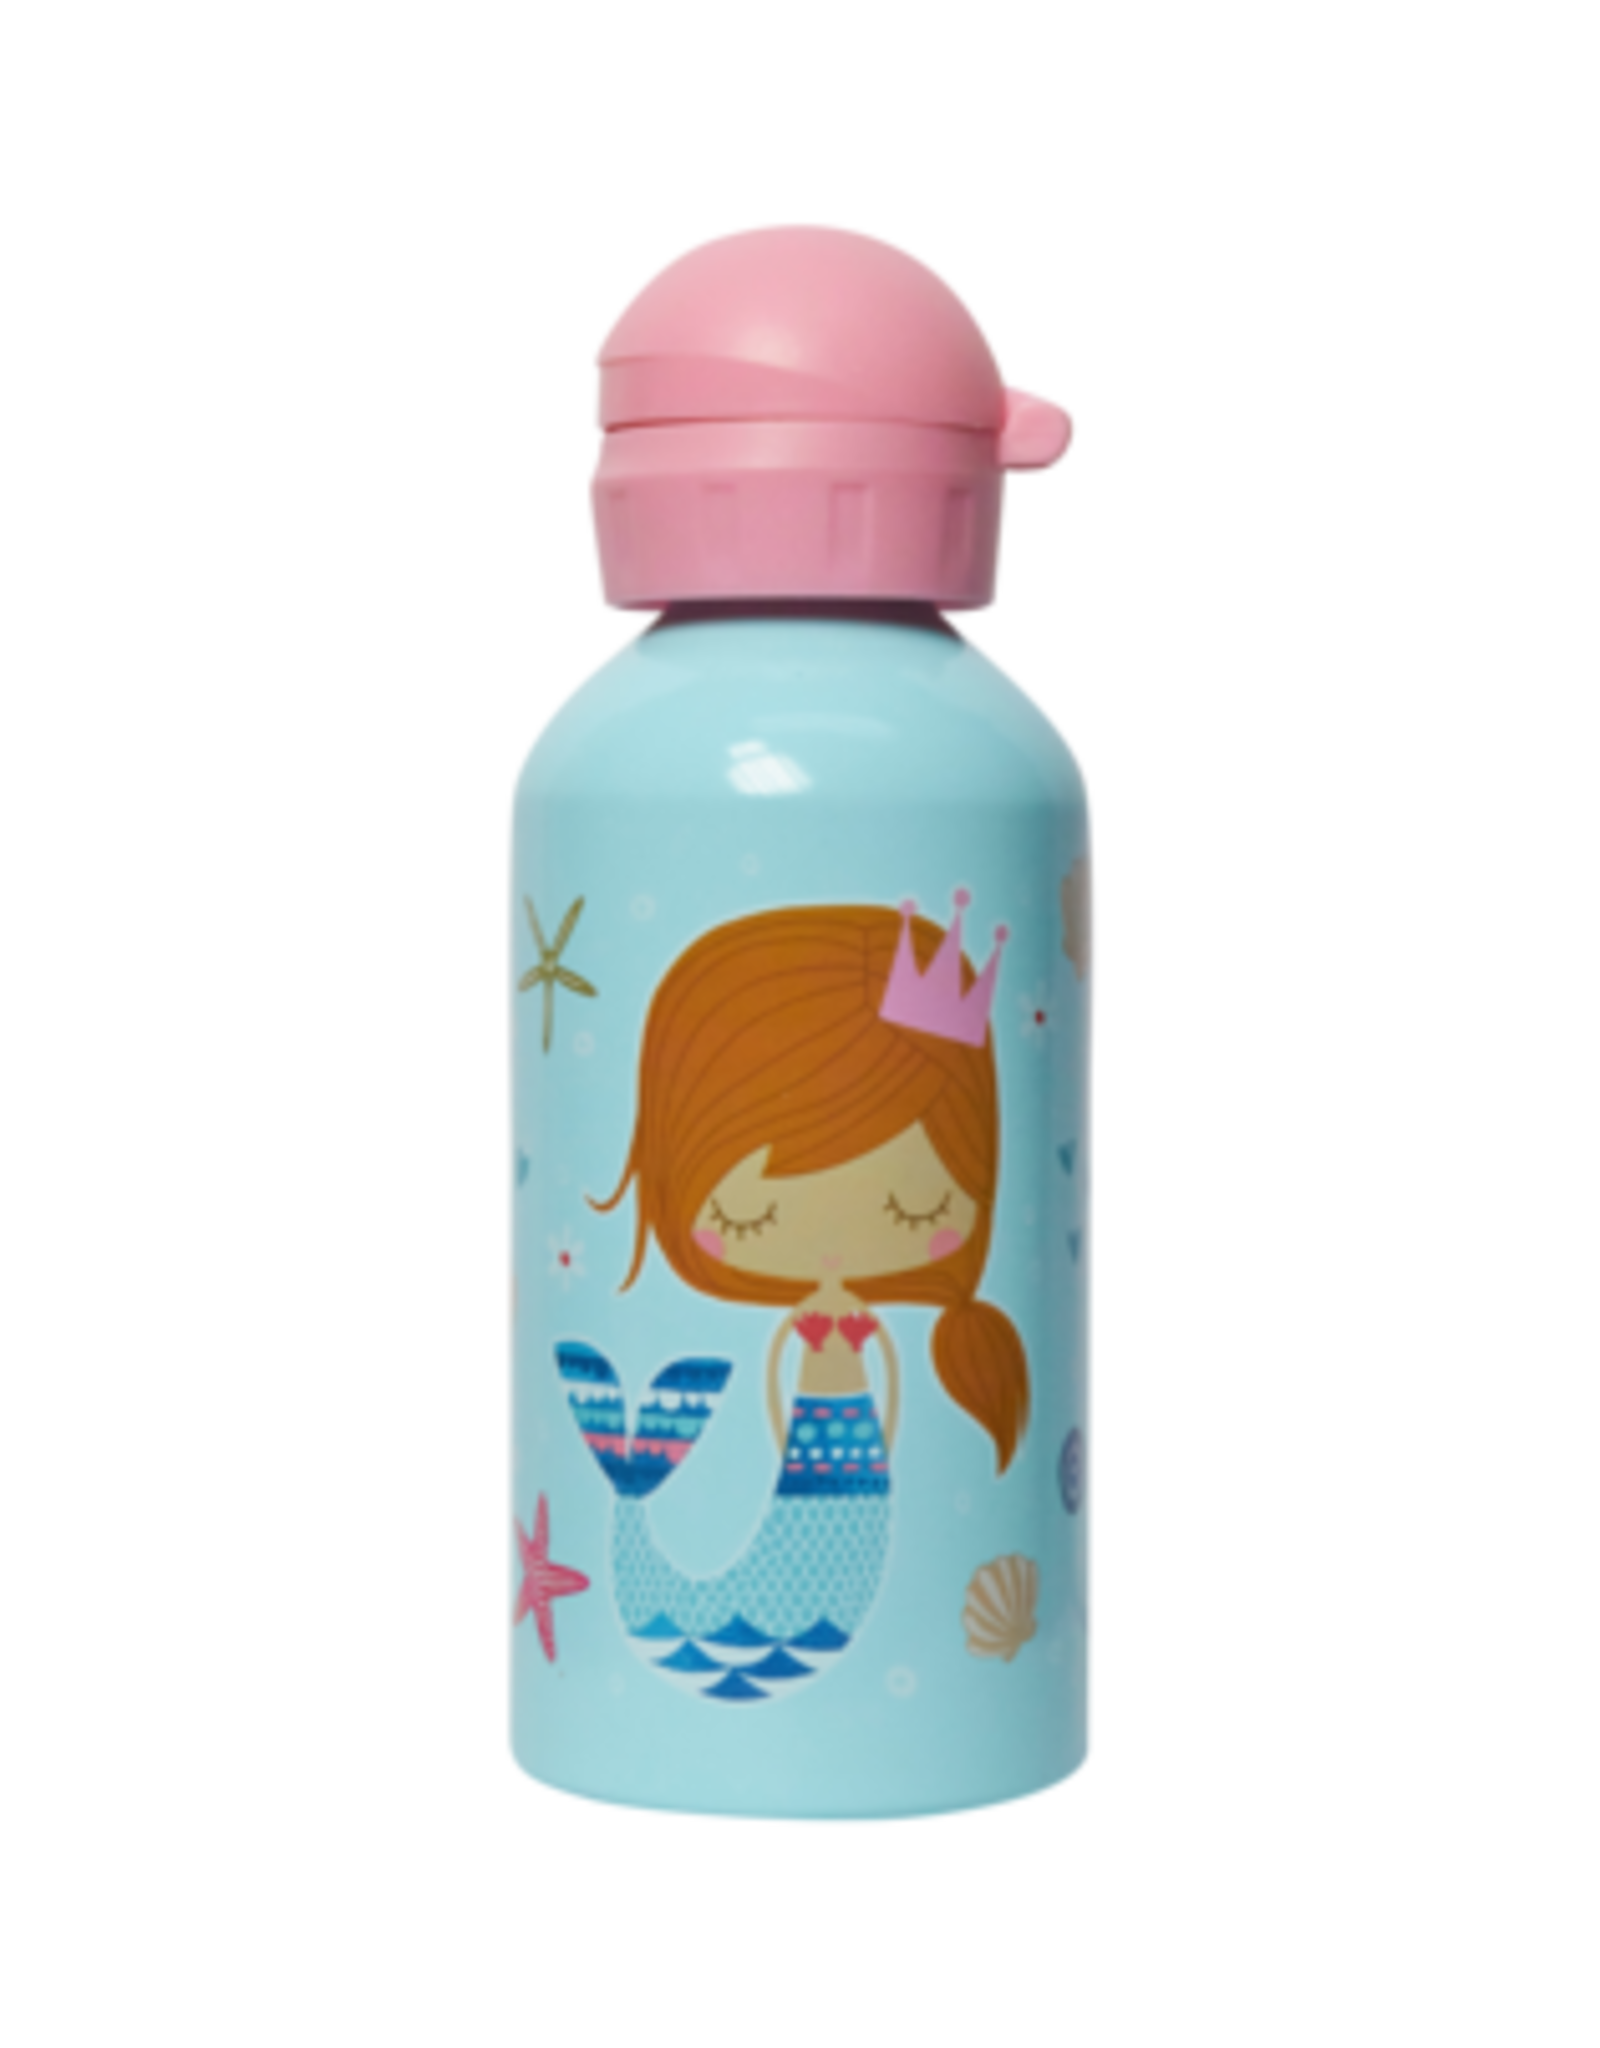 EARTH NYMPH EARTH NYMPH WATER BOTTLE